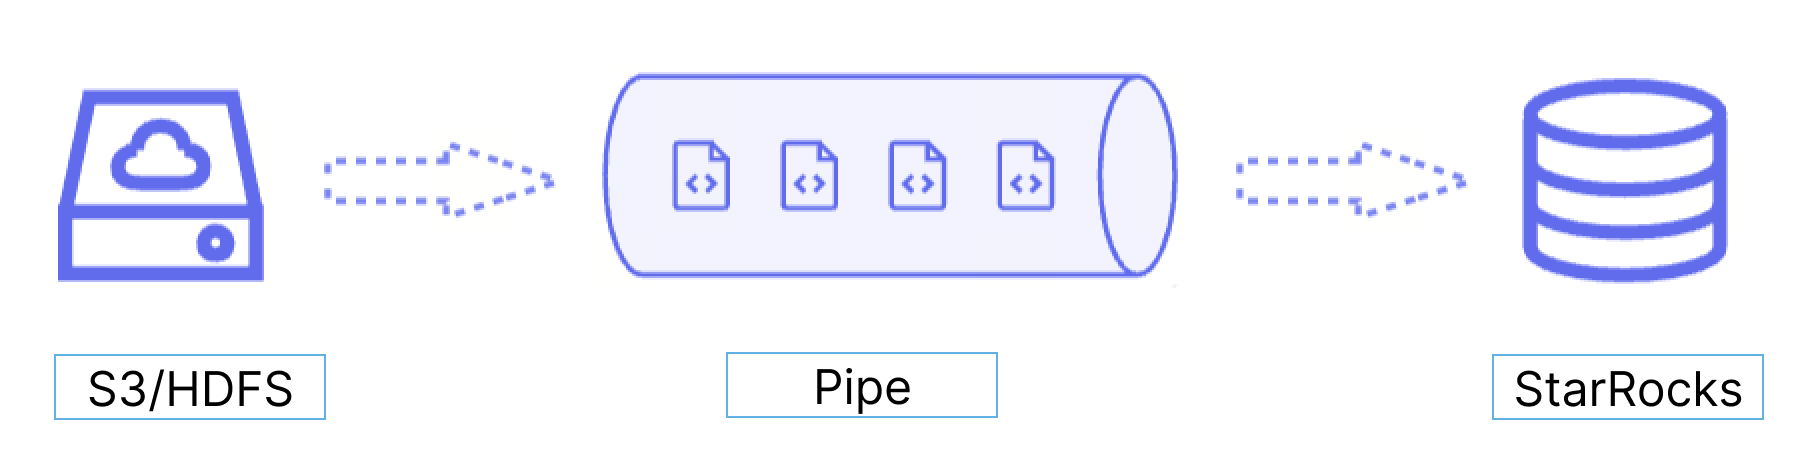 Pipe data flow